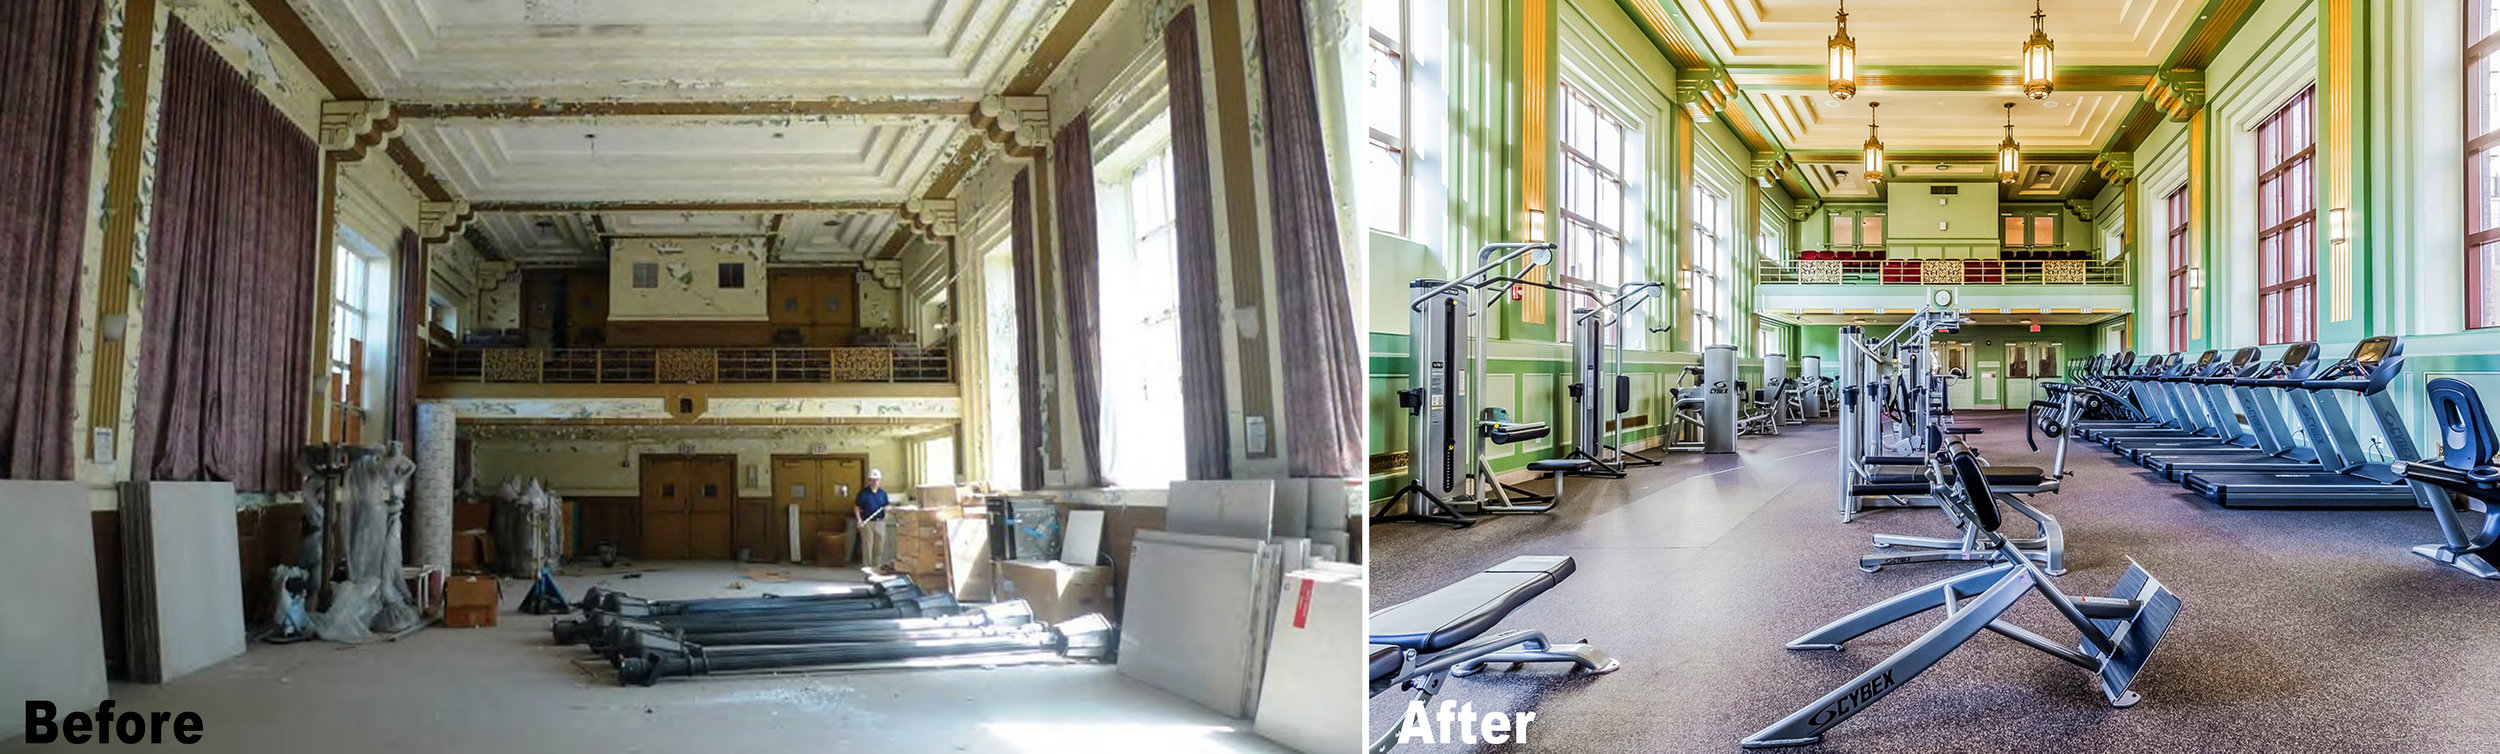 Auditorium Before and After.jpg